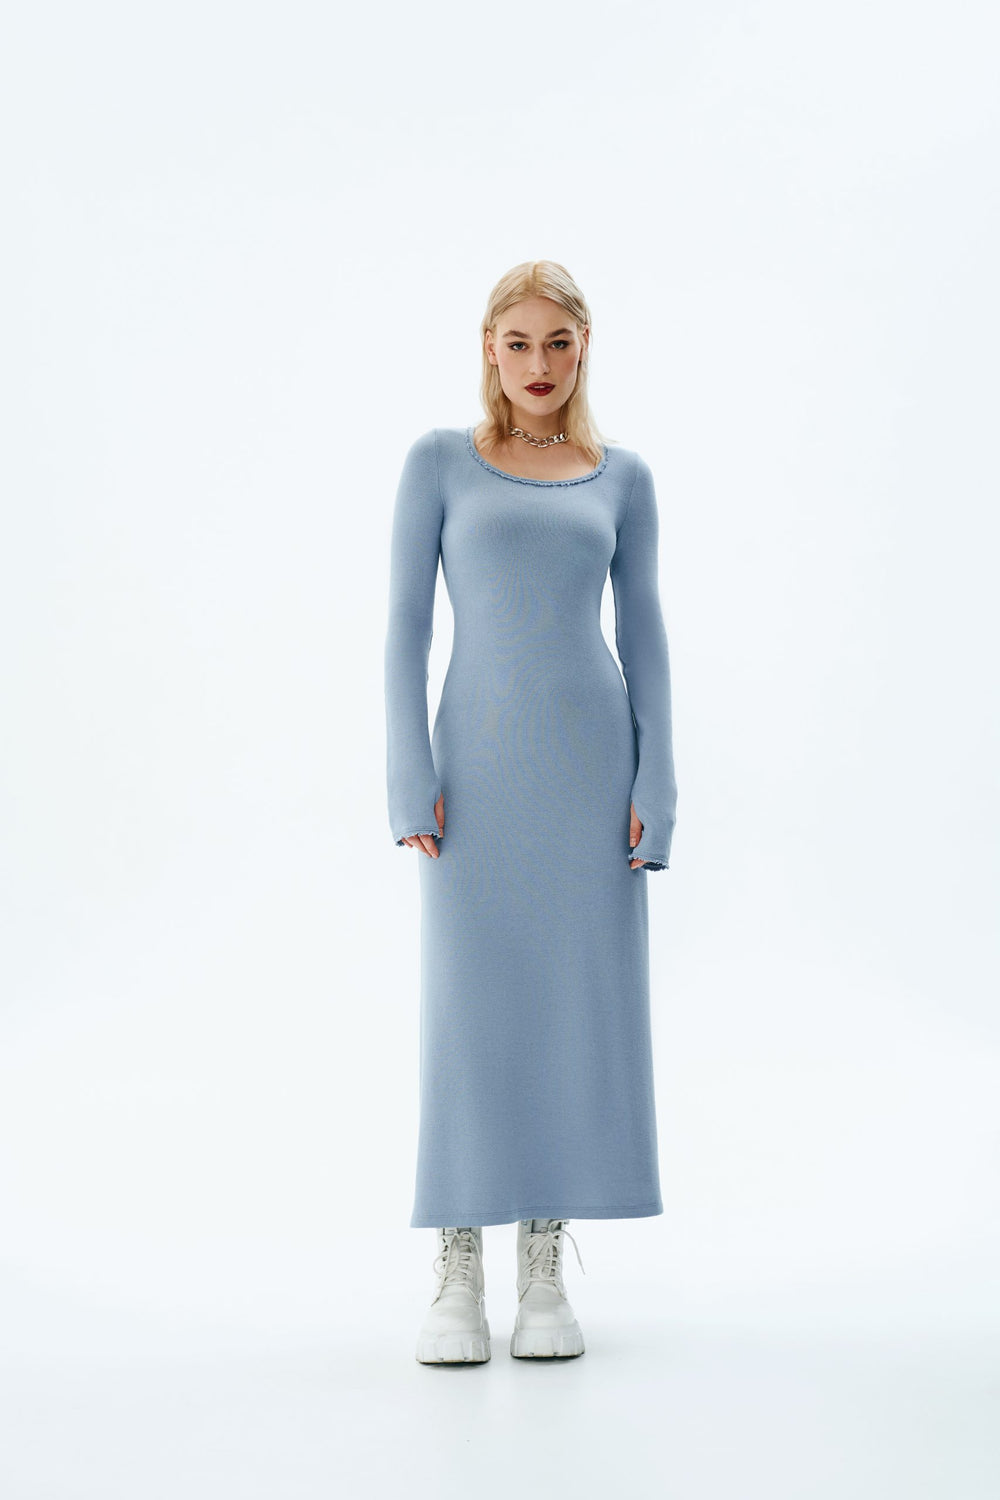 Woman wearing the Alison Dress sewing pattern from Vikisews on The Fold Line. An dress pattern made in sweater knits, rib knits, or jersey fabrics, featuring a close-fit, flared at the hem, low round neckline, bust darts, long close-fitting one-piece set-